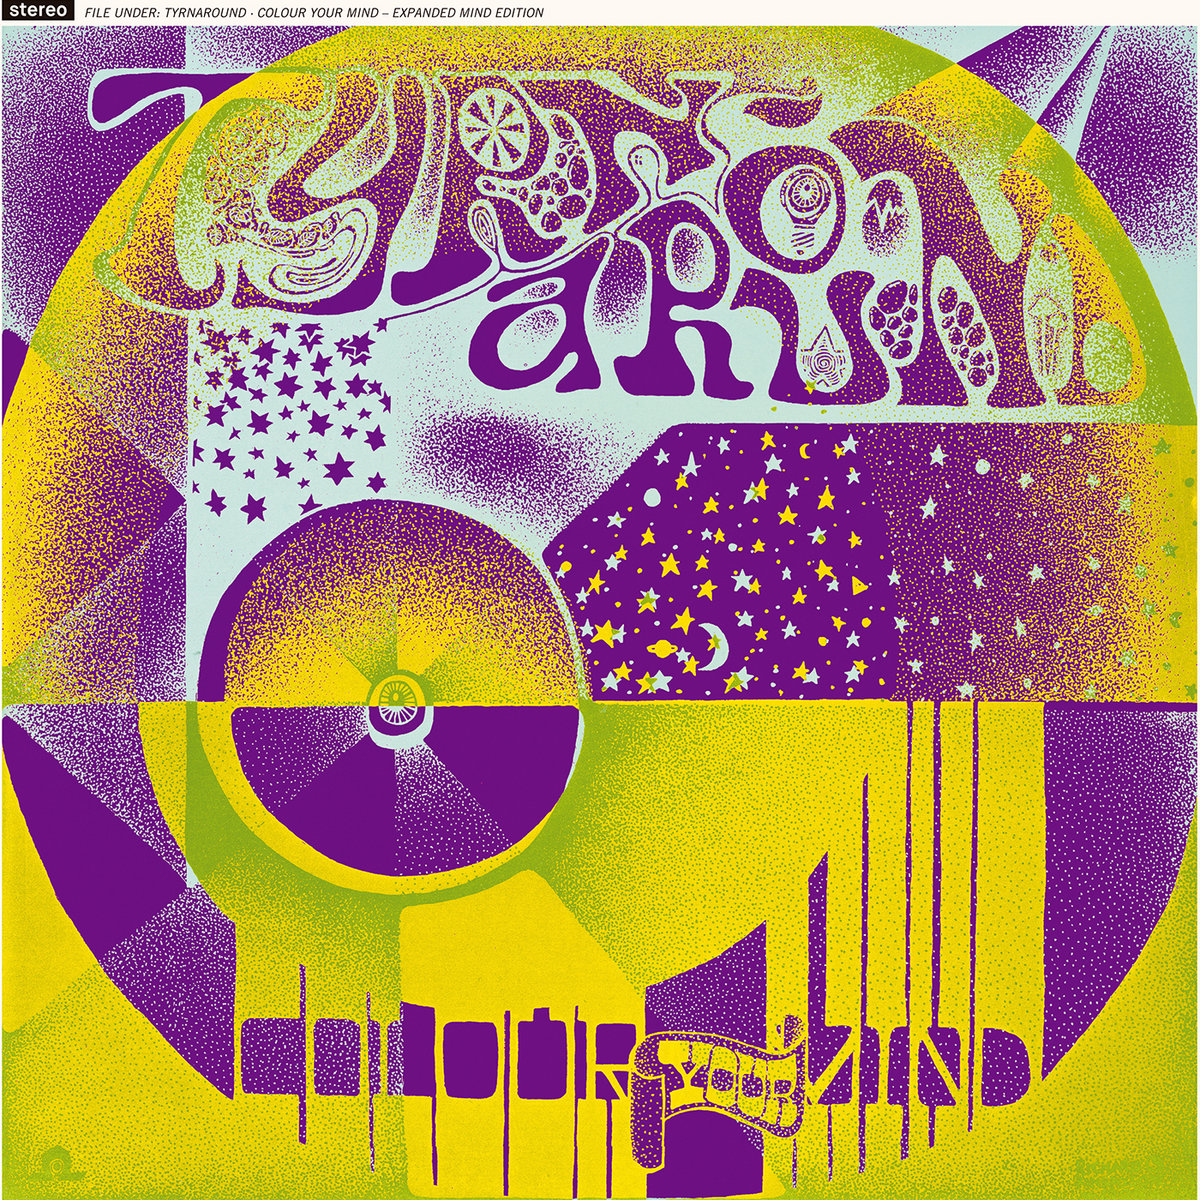 Colour Your Mind (Expanded Mind Edition)